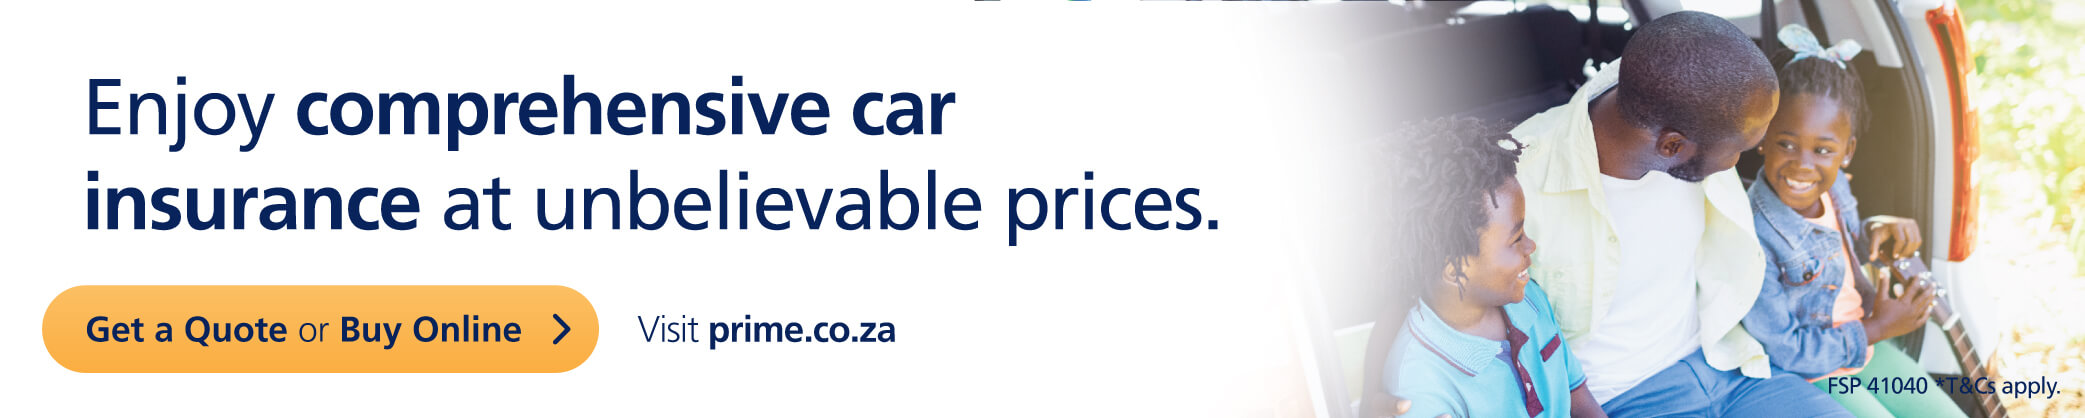 A South African lean on the back of their vehicle, which has cheap car insurance.